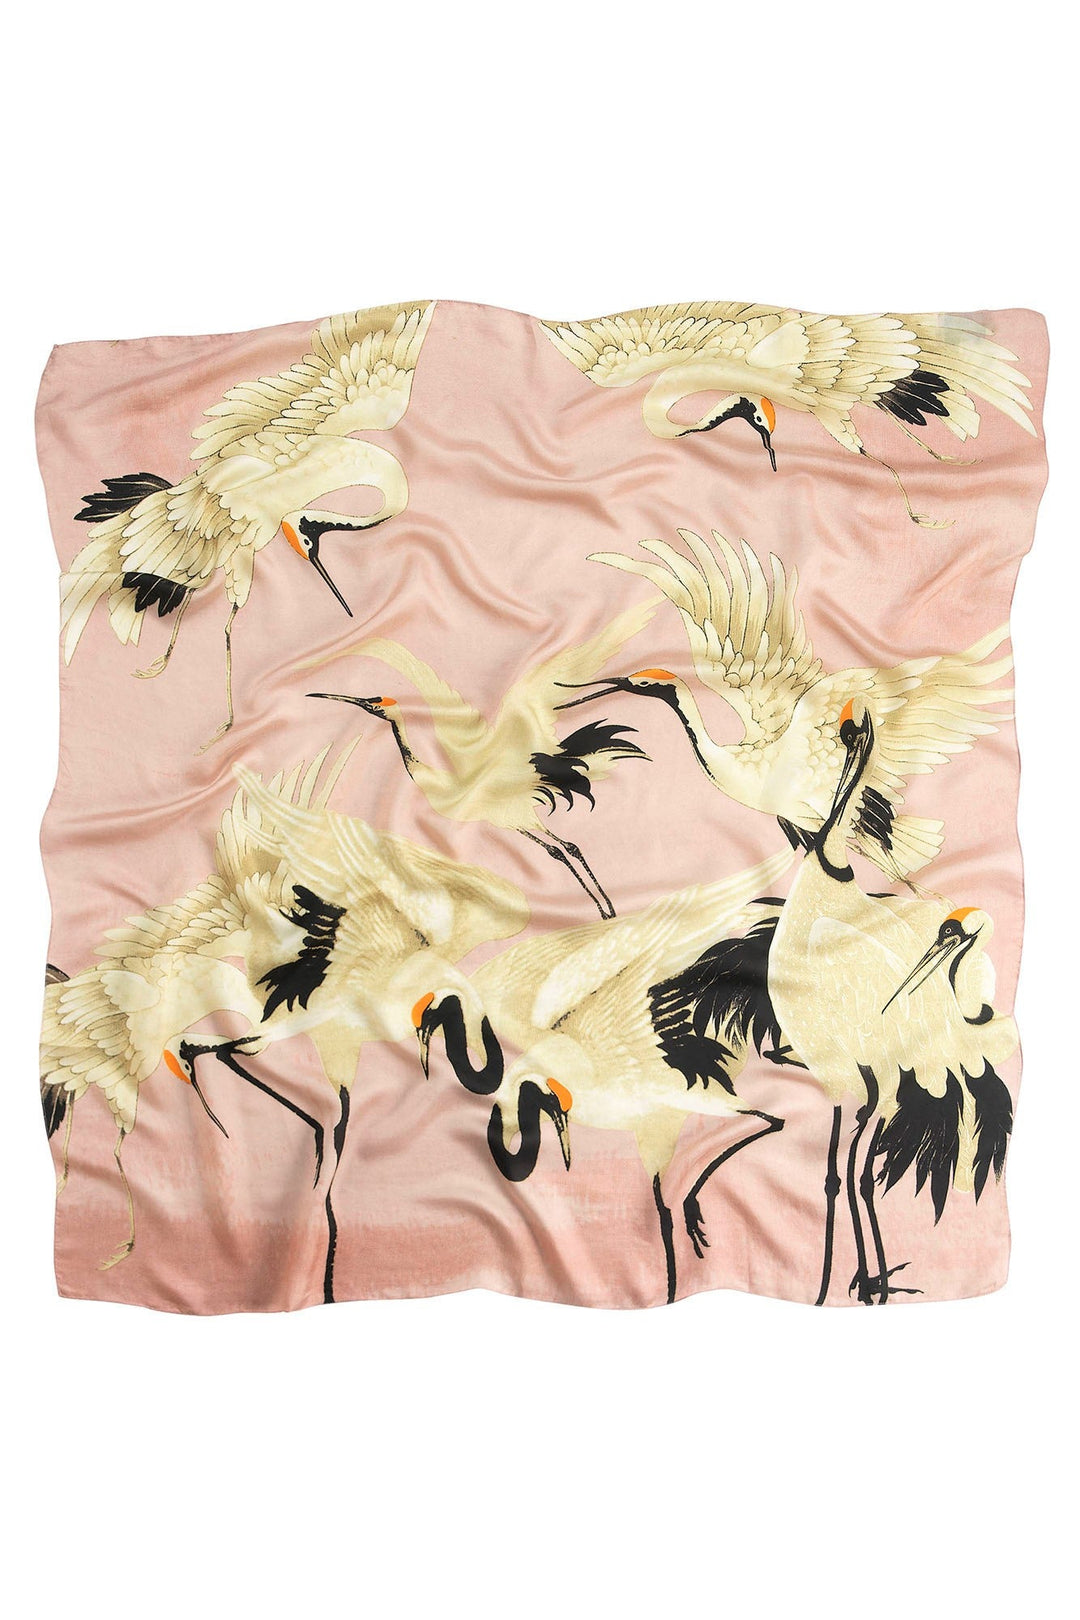 One Hundred Stars Stork Plaster Pink Silk Square Scarf- 100% silk, 100% hand screen printed and a whole 100cm x 100cm of print, this silk scarf oozes luxury whether you wear it knotted around your neck, as a headscarf or fastened around the handle of your favourite handbag.